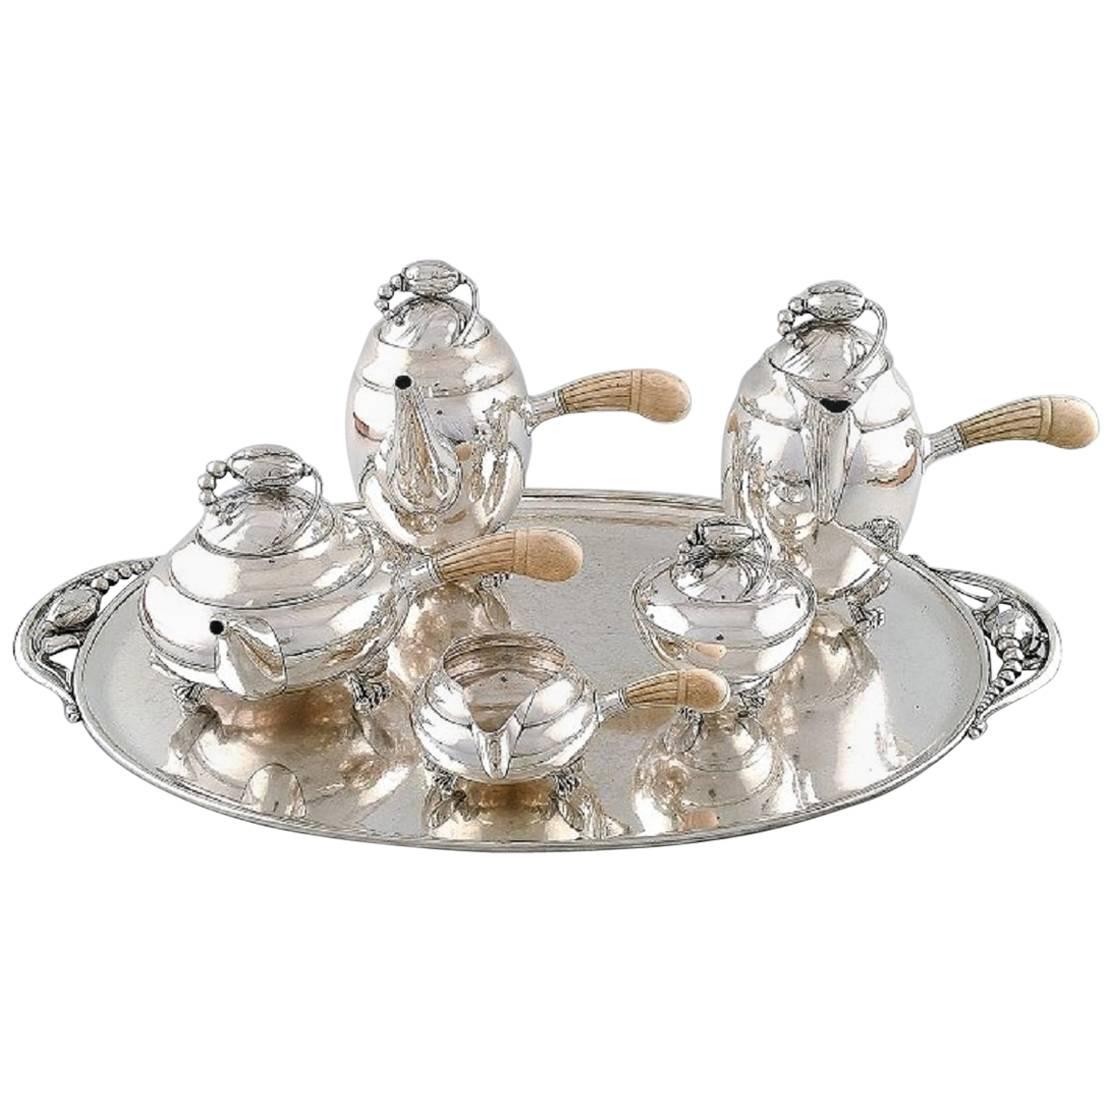 Exquisite and Very Rare Georg Jensen Blossom Sterling Tea and Coffee Service